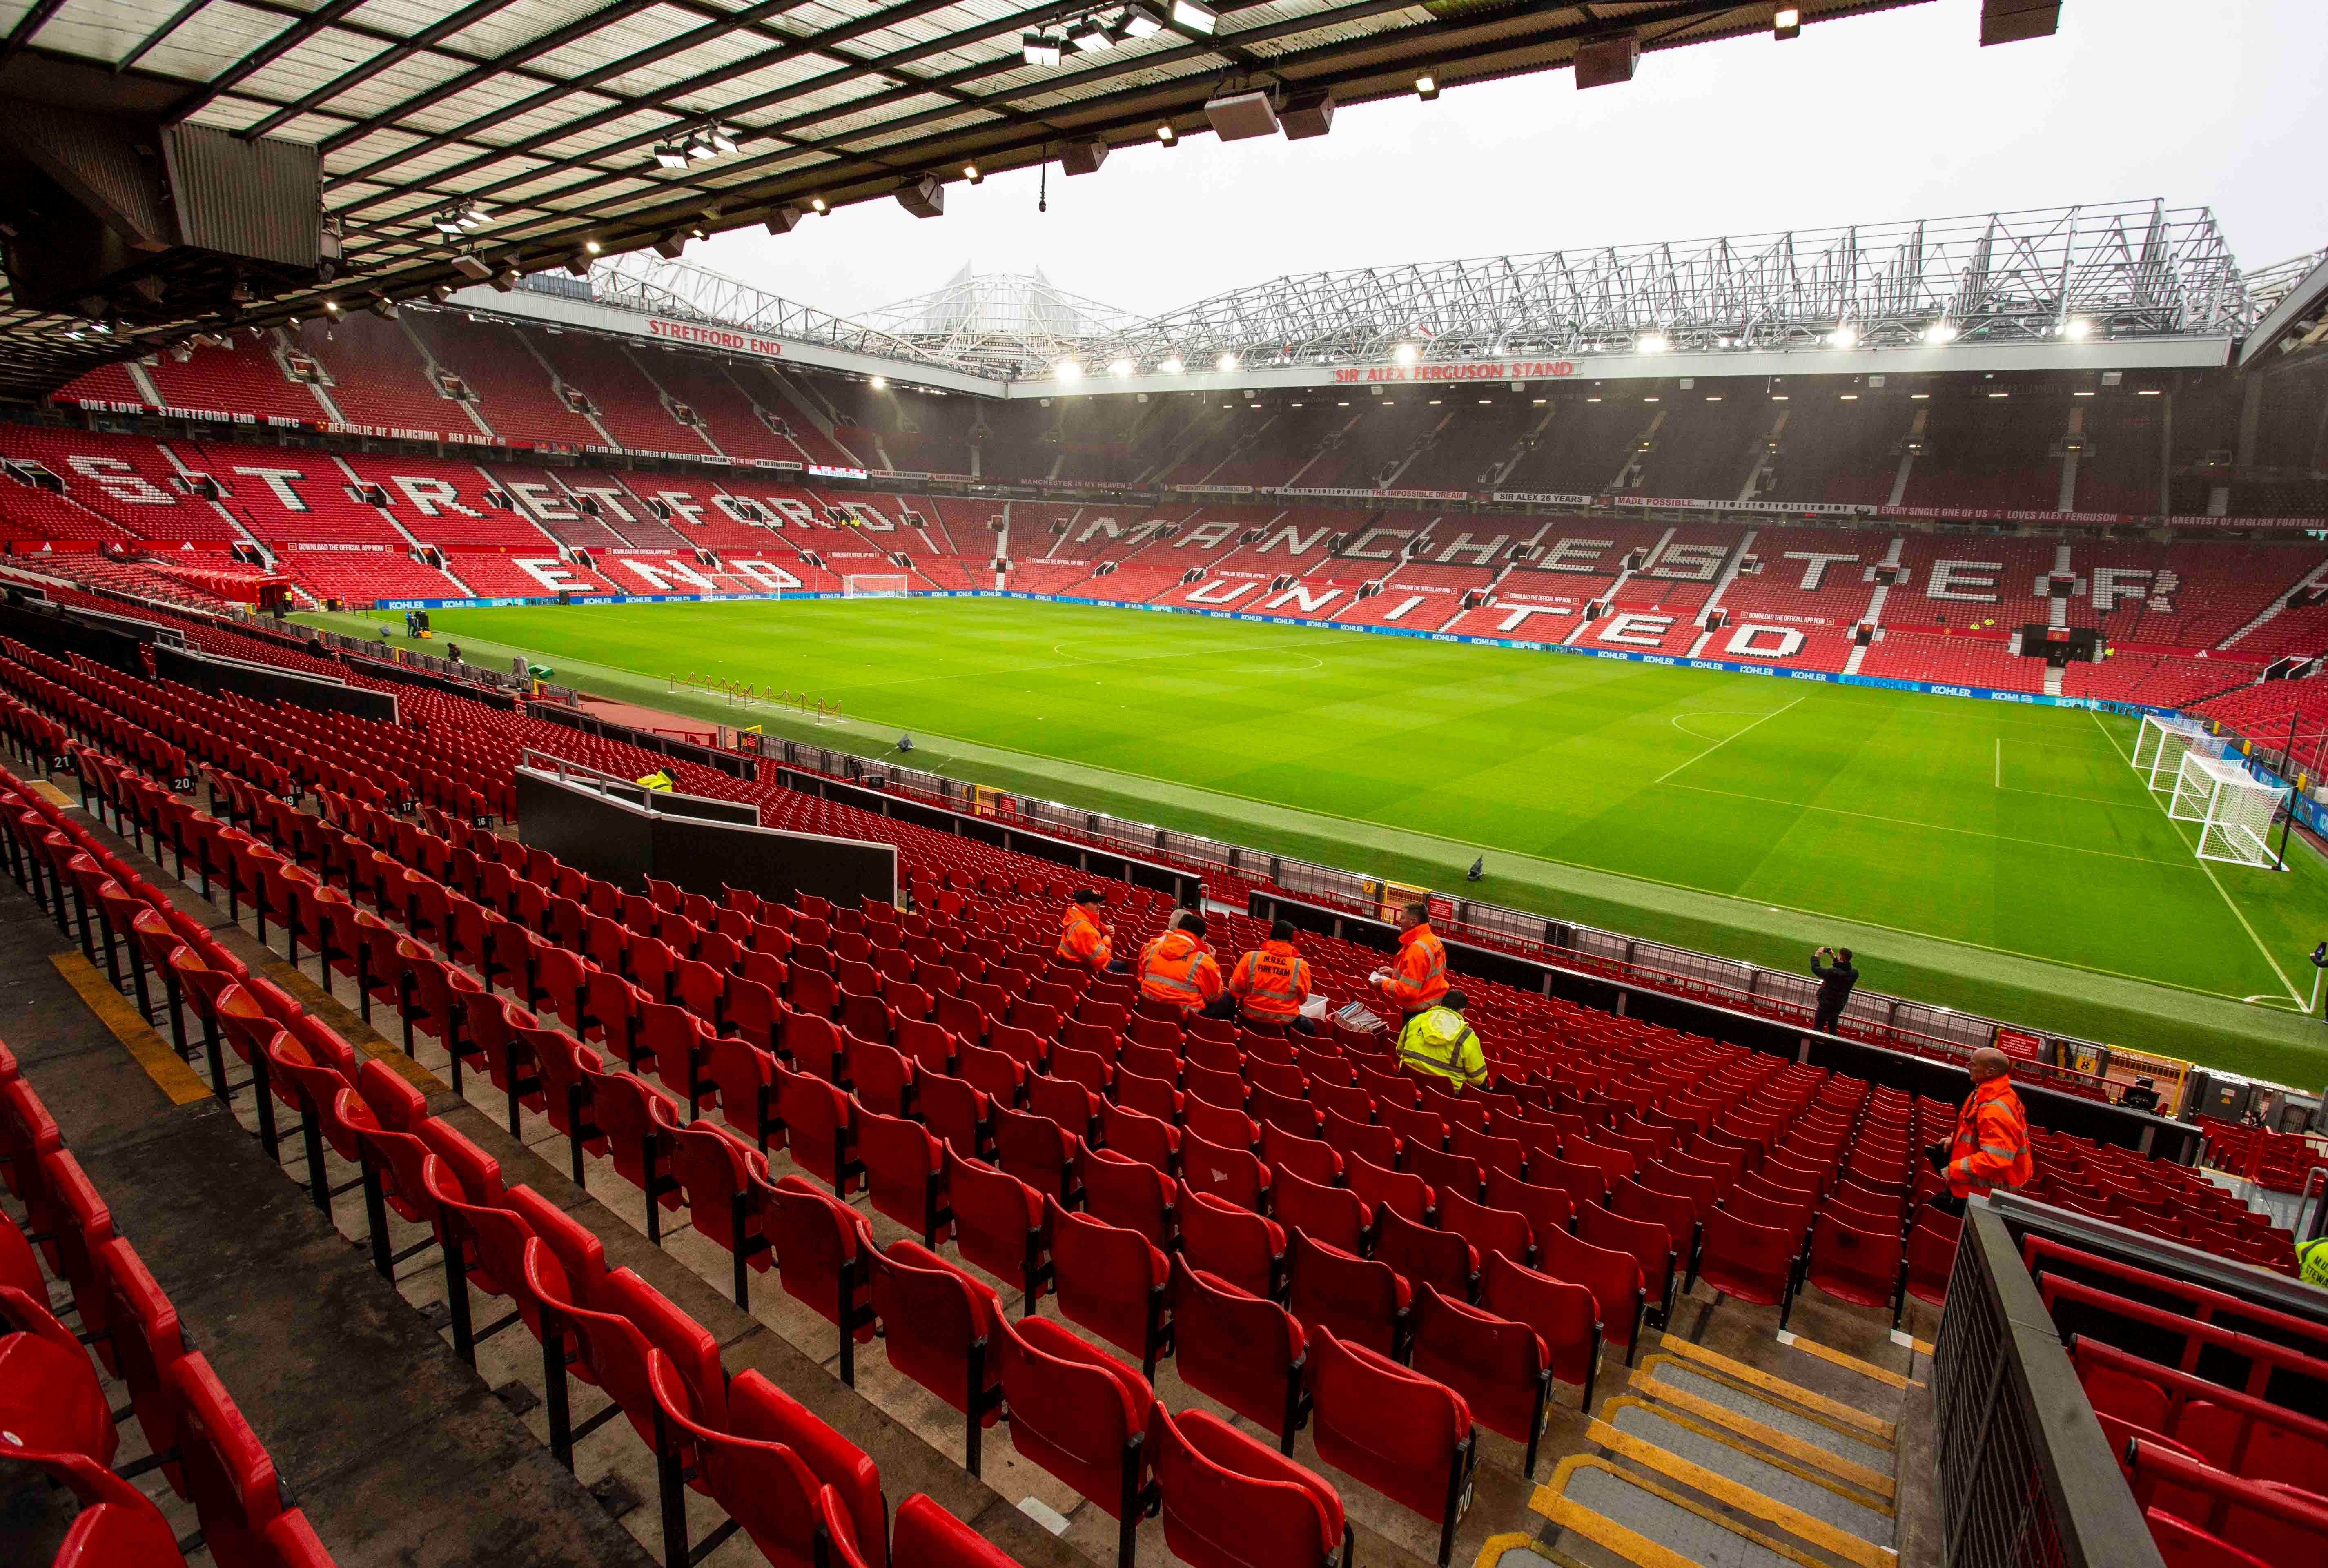 The Red Devils' ground is set for a revamp, sooner AND later